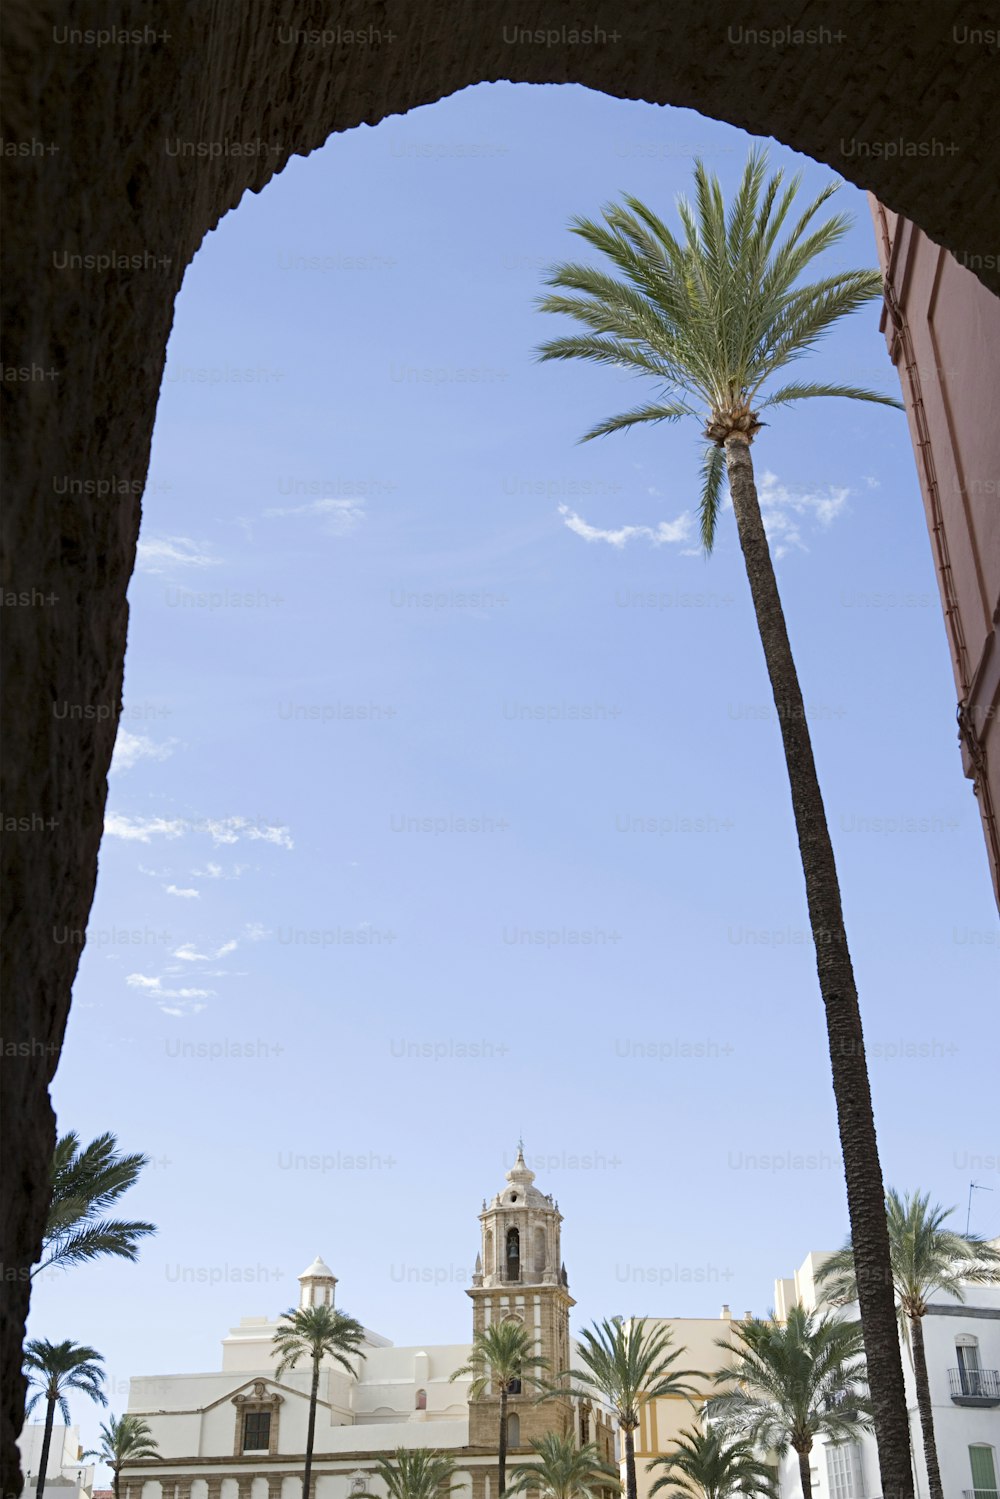 a palm tree in front of a building with a clock tower